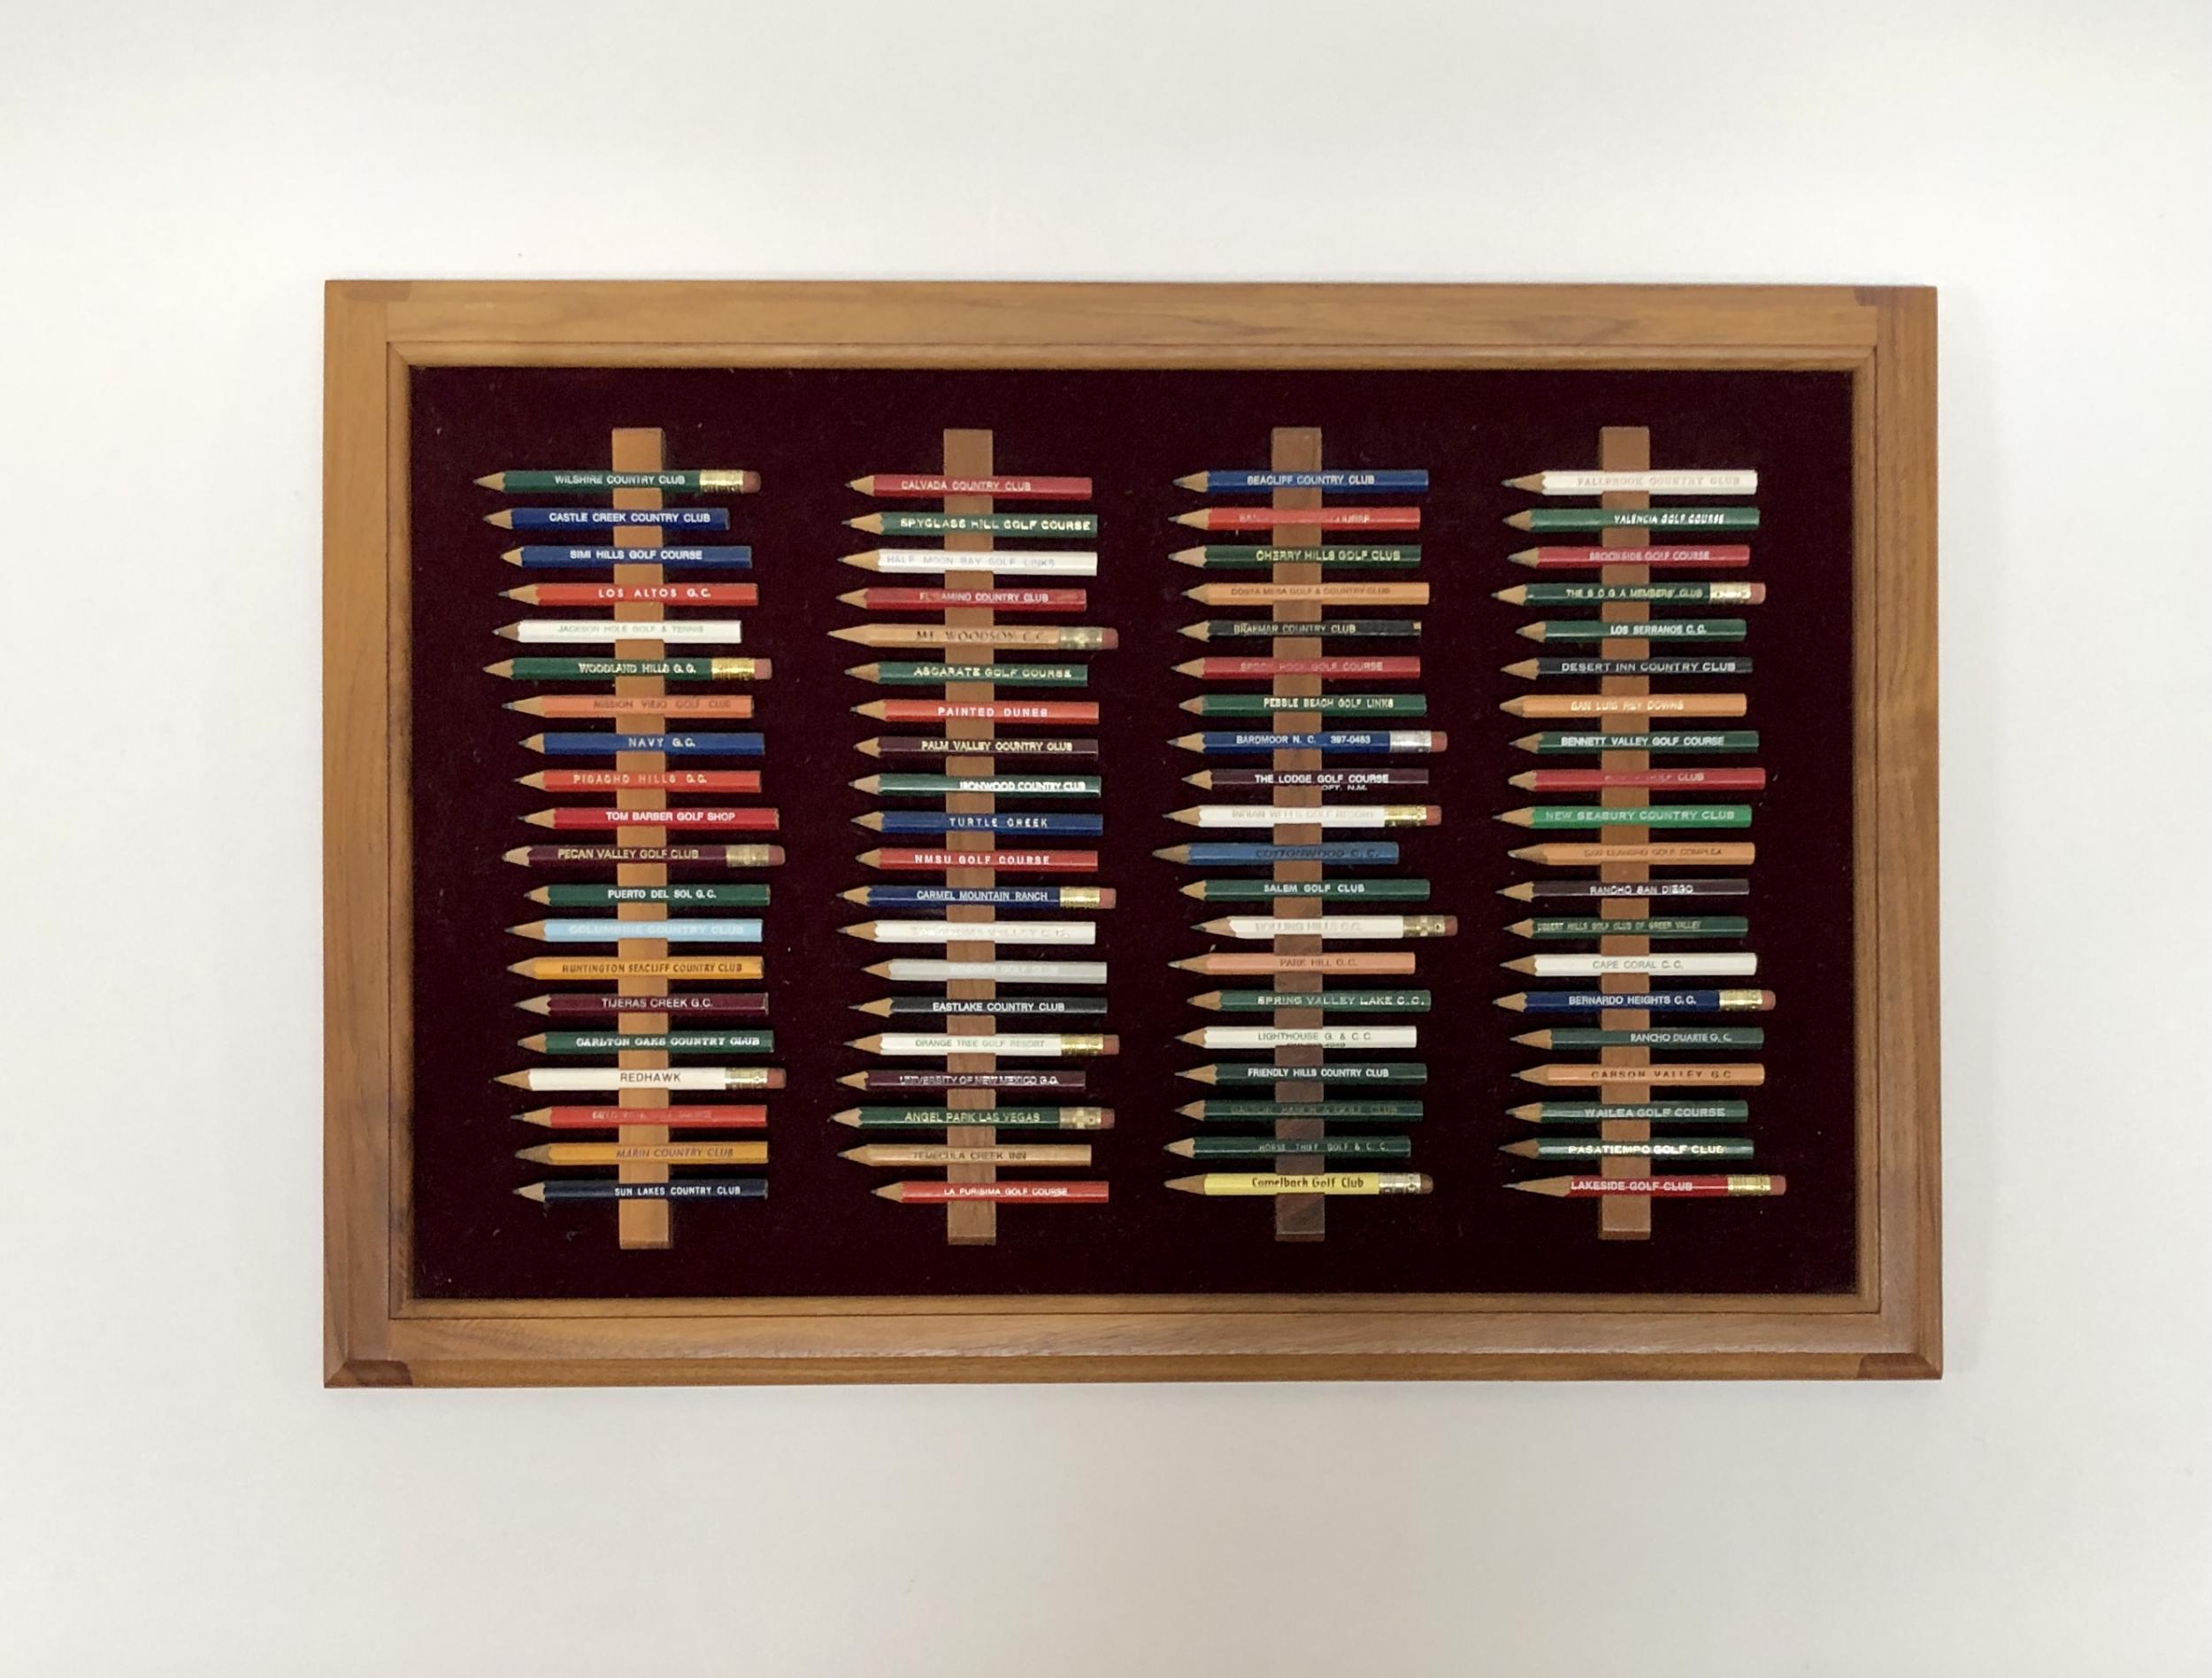 These are two unique and extensive collections of pencils from golf courses across the country mounted in wood, backed in a deep red velvet, and framed. Projected collection beginning in the 1970s.